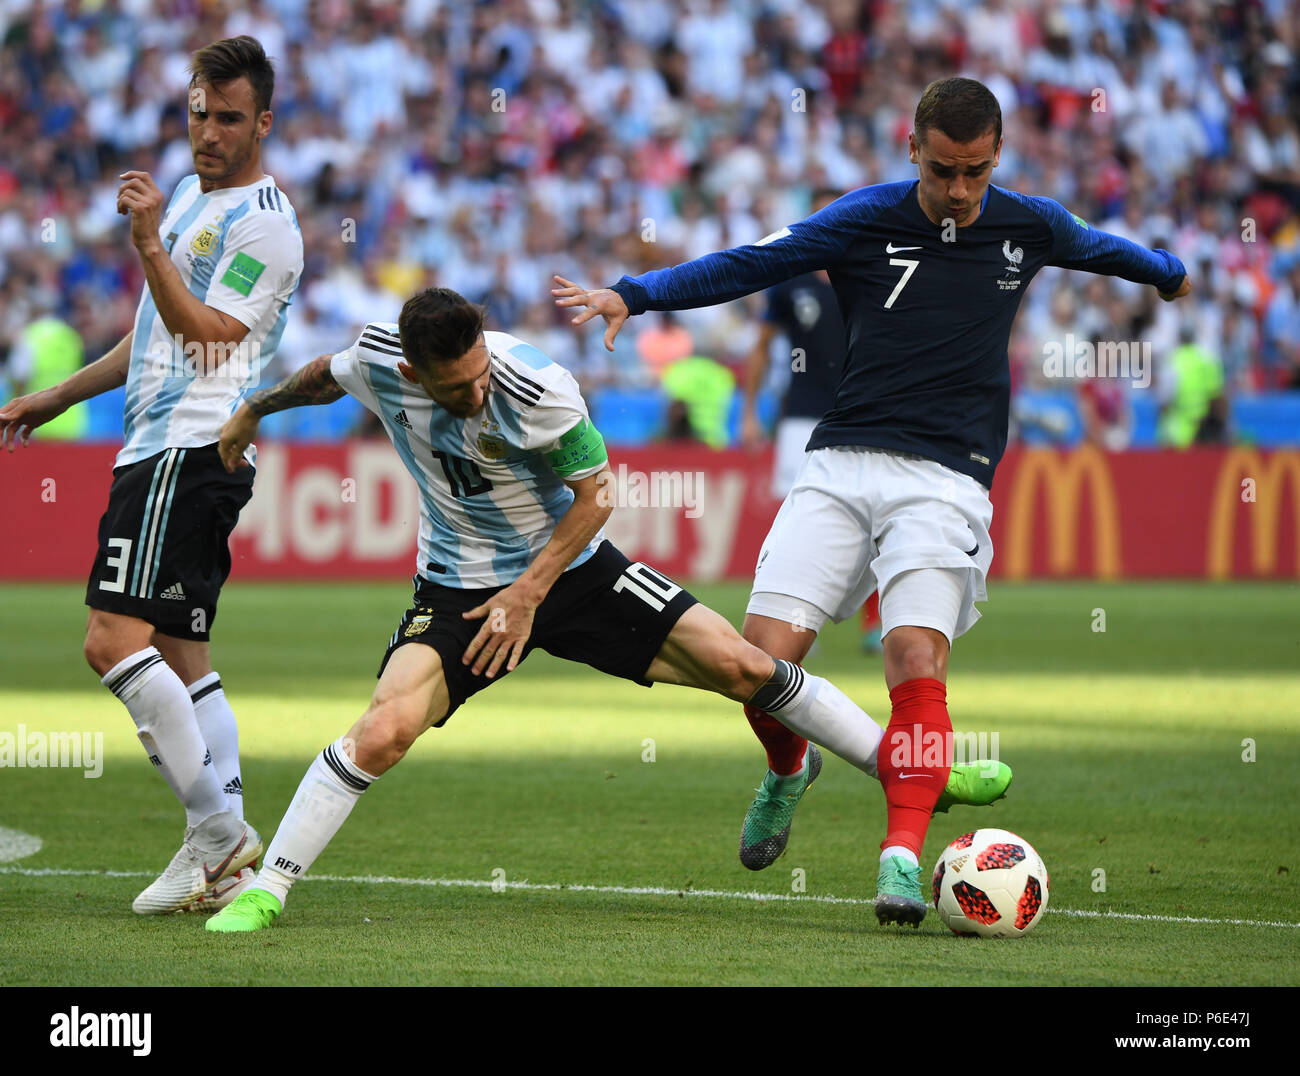 (180630) -- KAZAN, June 30, 2018 (Xinhua) -- Antoine Griezmann (R) of France vies with Lionel Messi (C) of Argentina during the 2018 FIFA World Cup round of 16 match between France and Argentina in Kazan, Russia, June 30, 2018. (Xinhua/Li Ga) Stock Photo